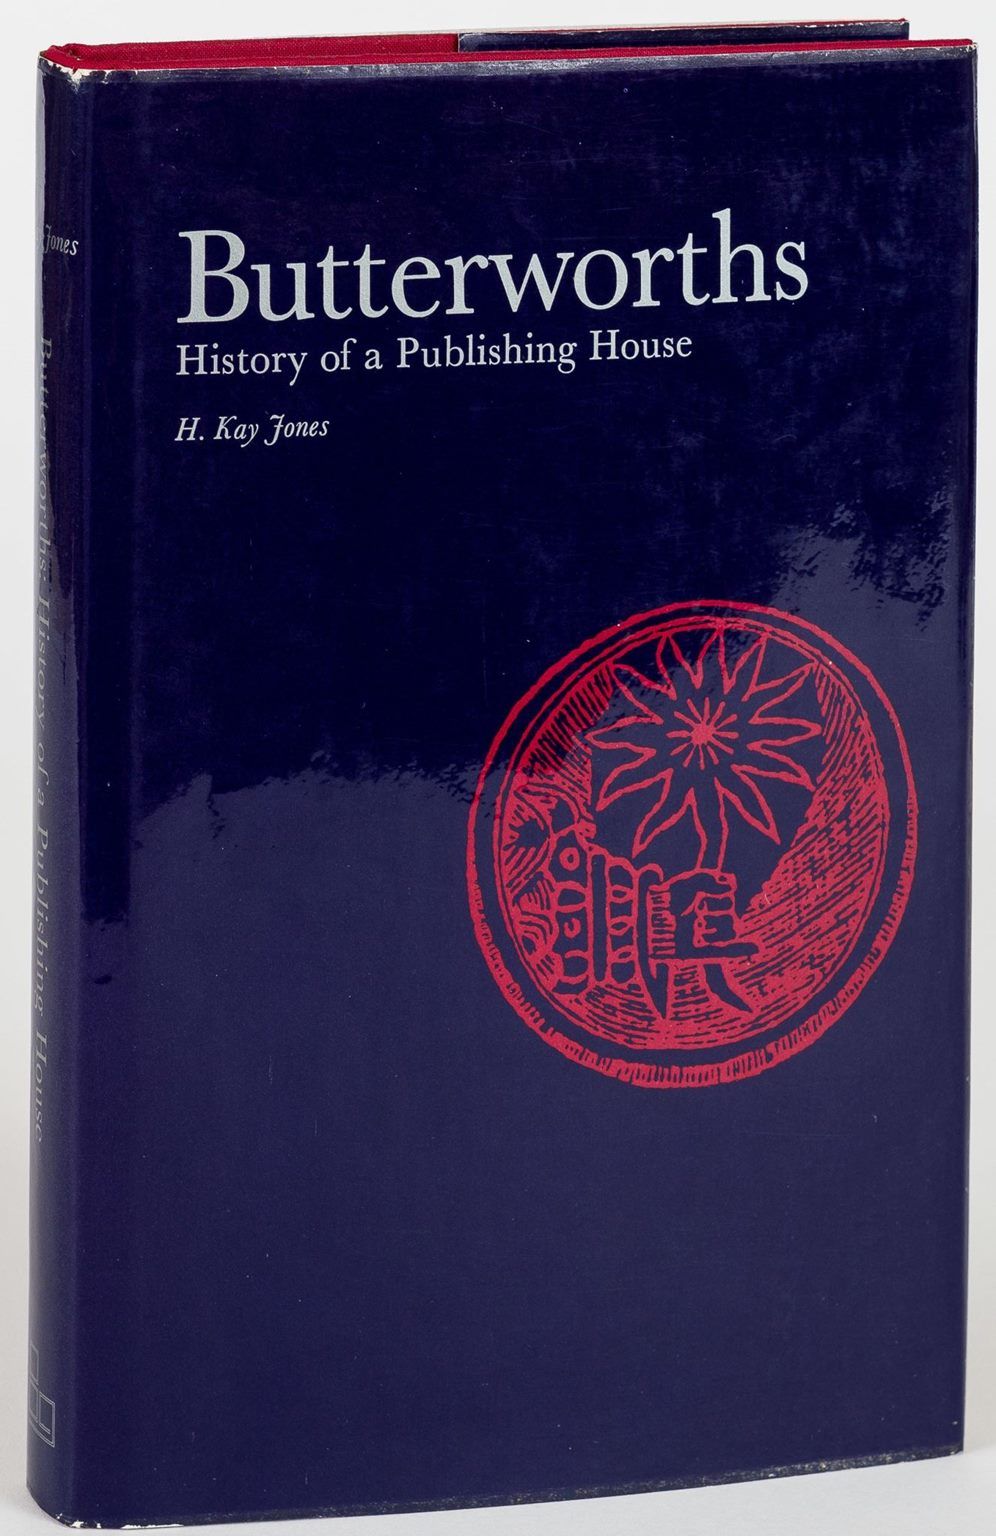 BUTTERWORTHS: History of a Publishing House